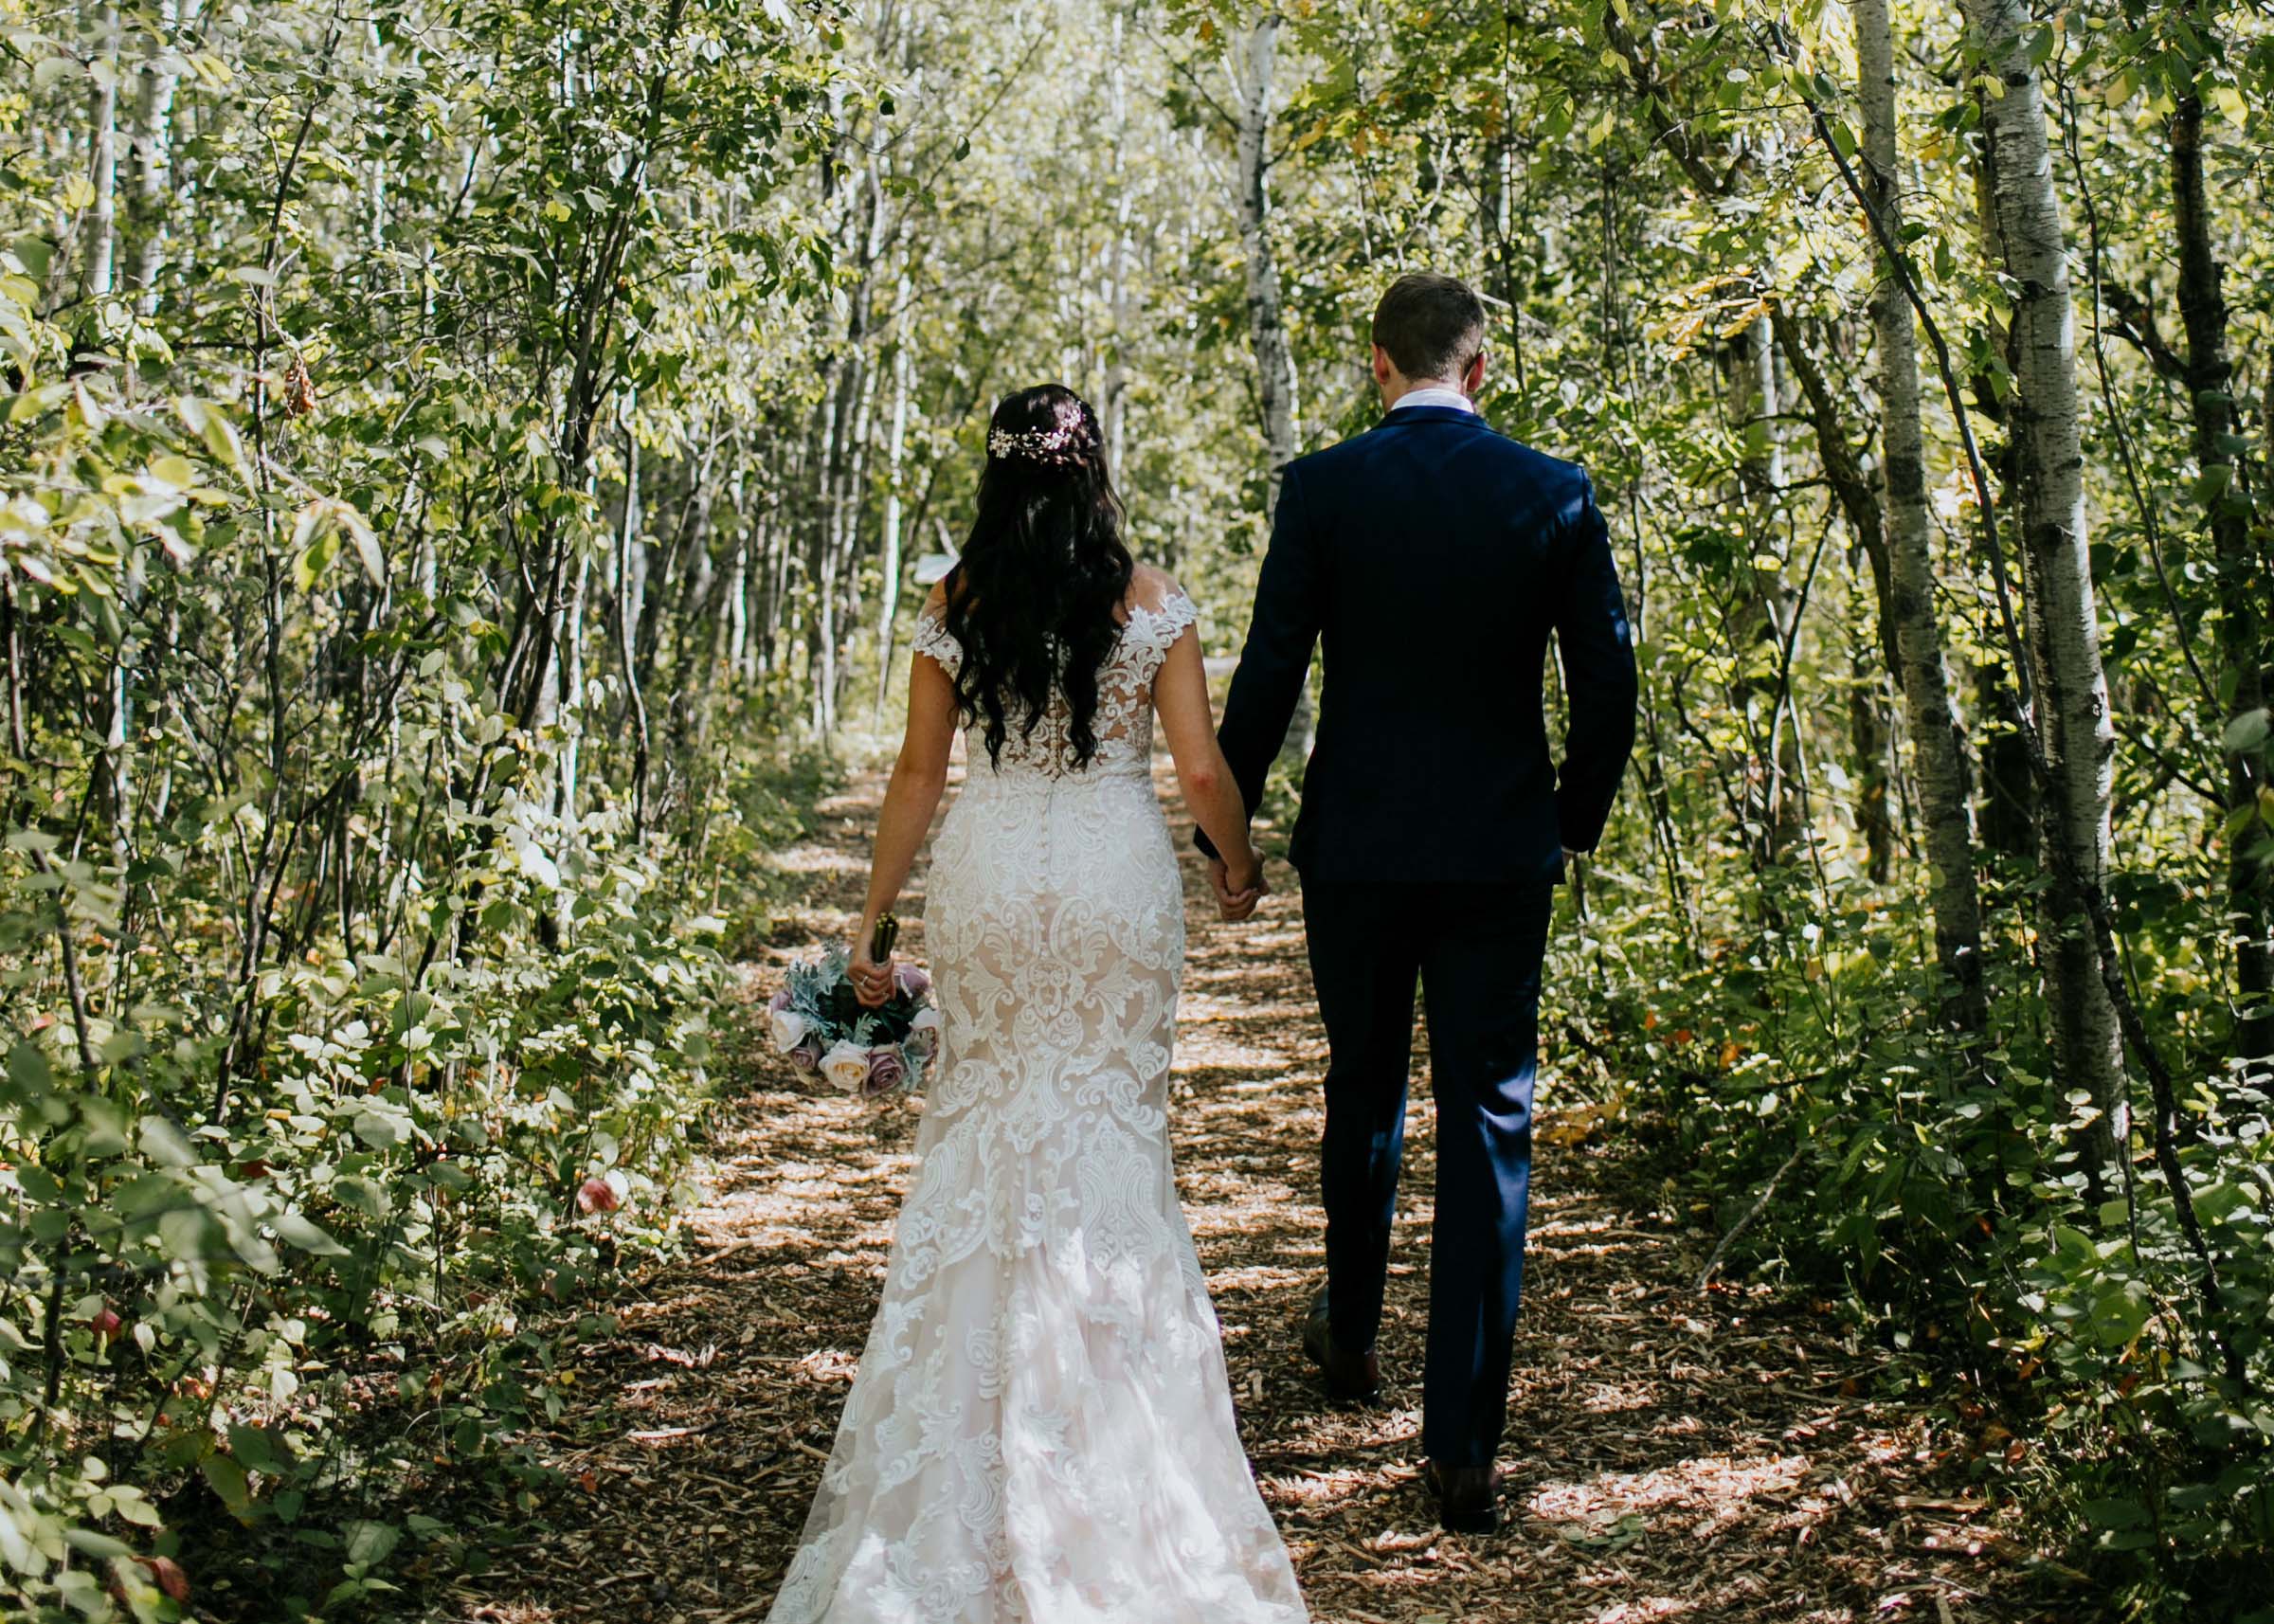 Newly married couple walk through the forest at FortWhyte Alive.